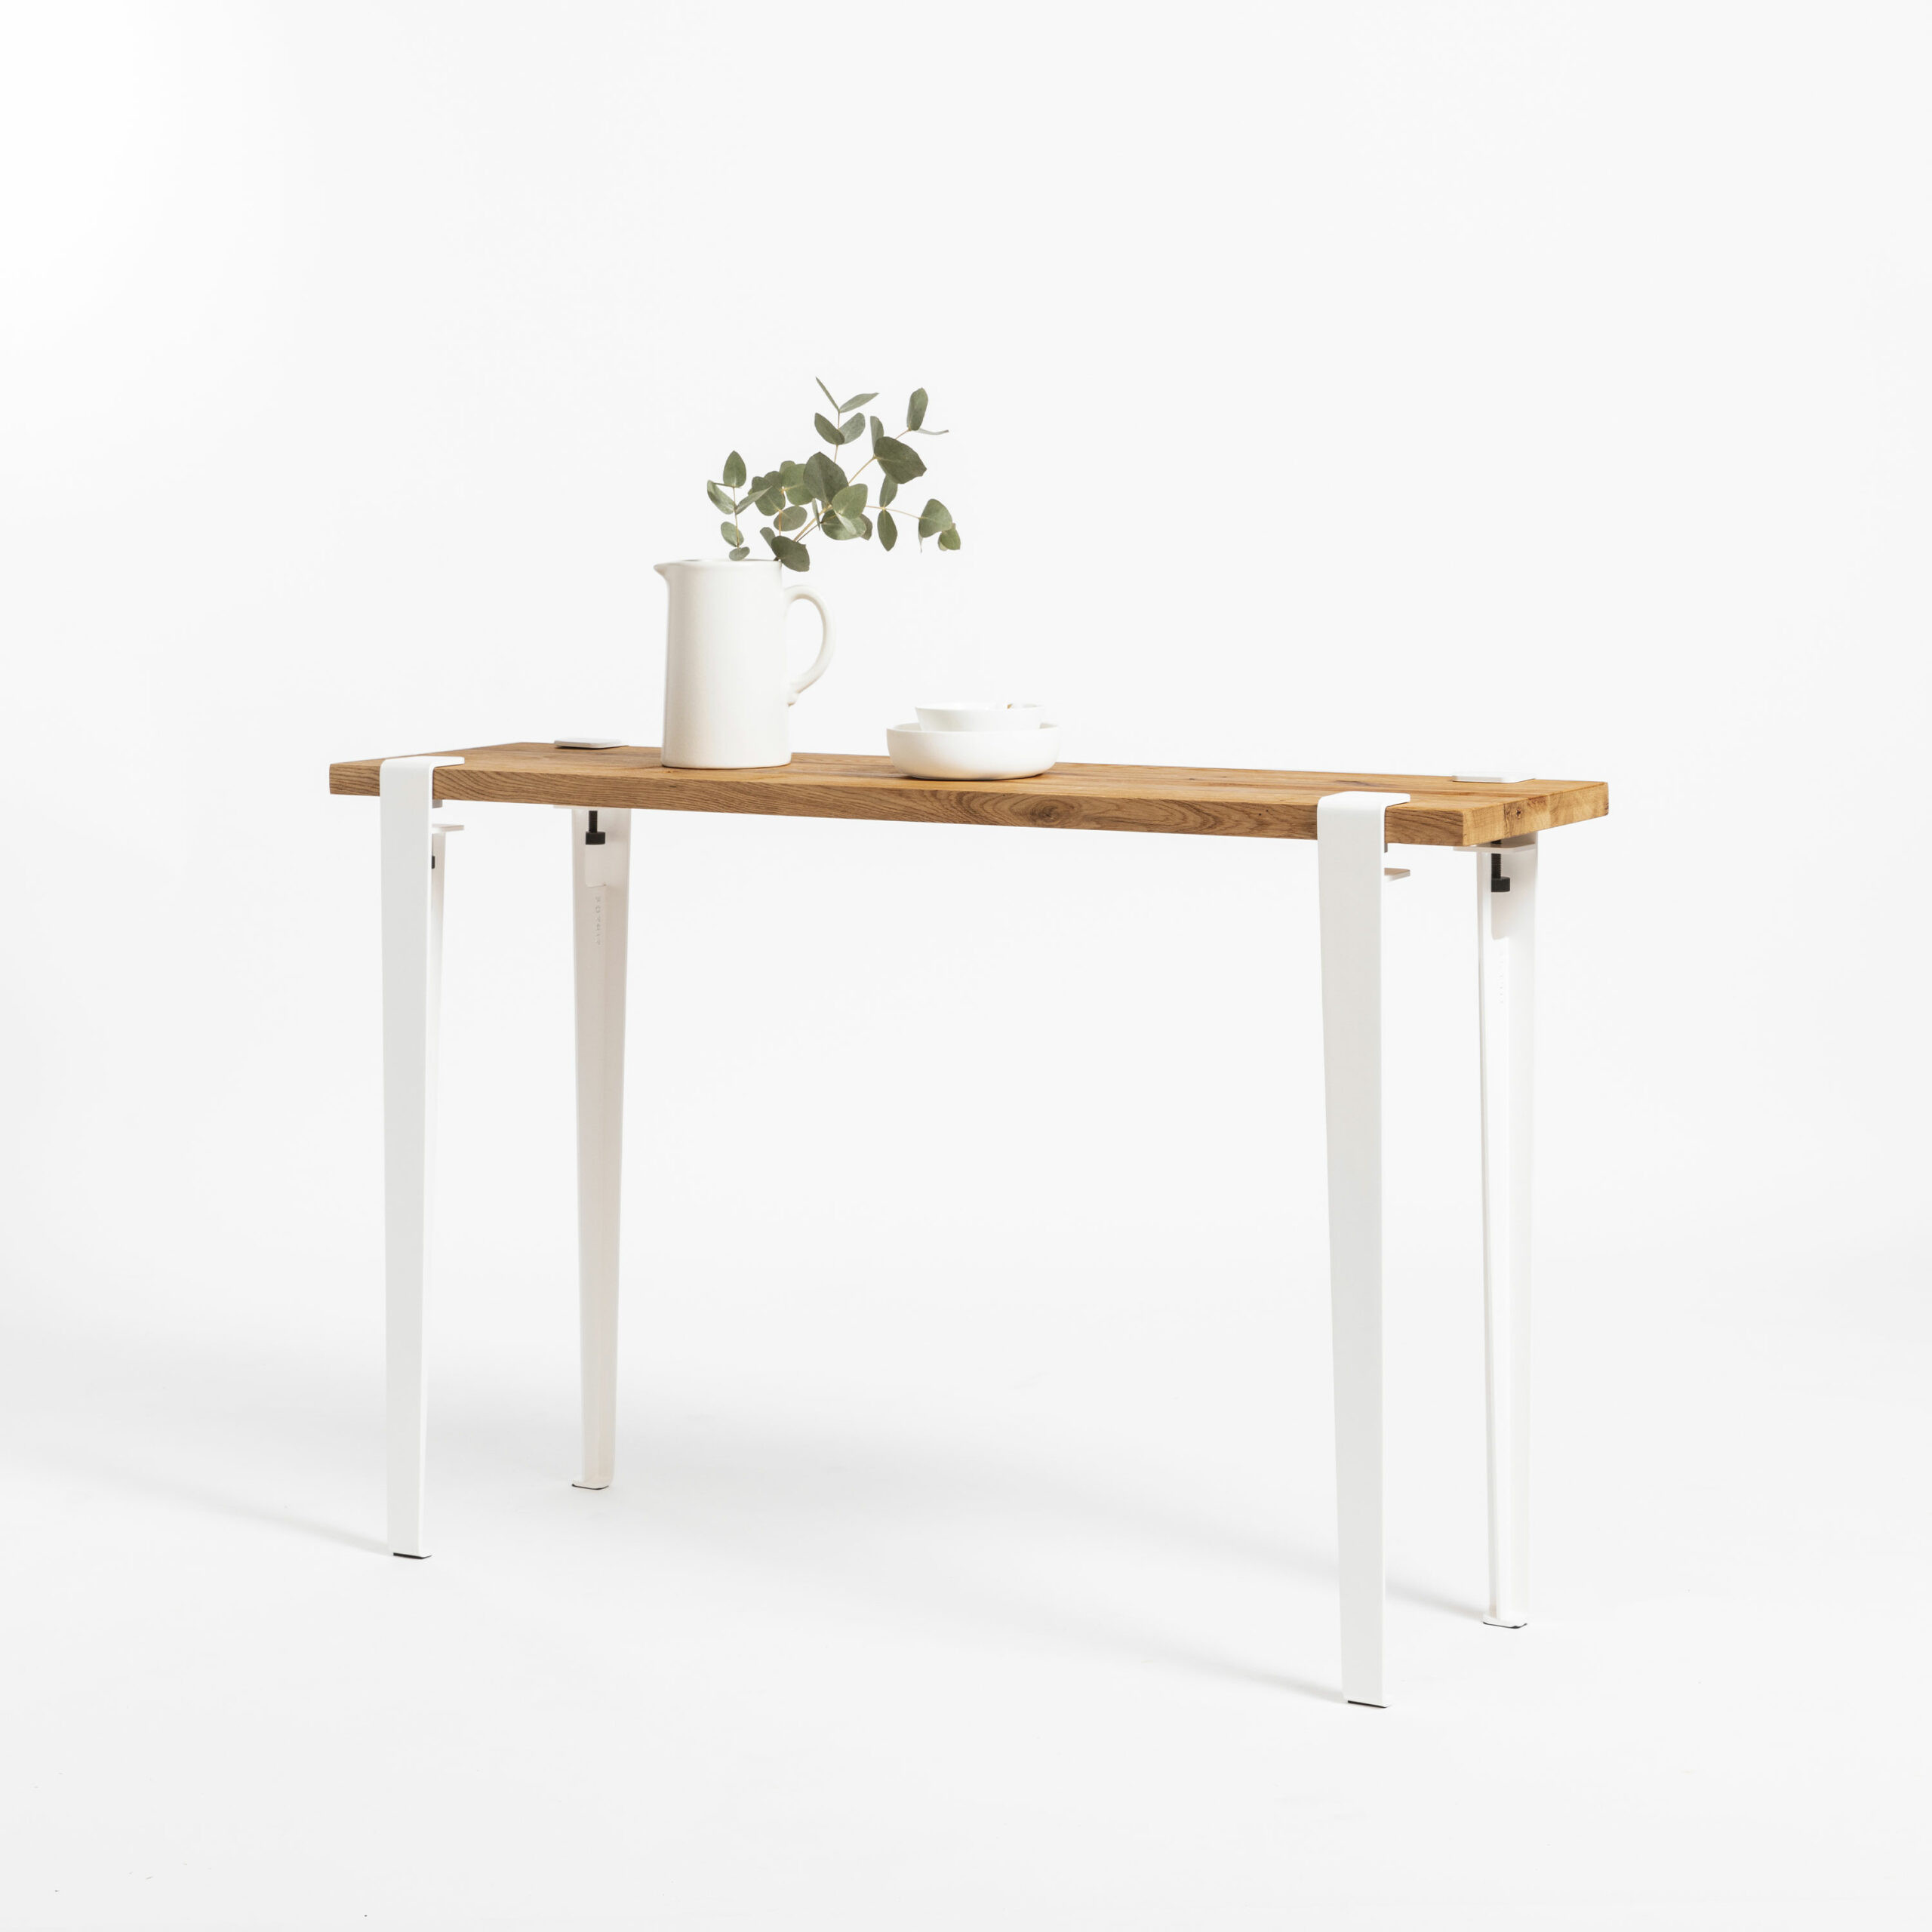 LIMA console in reclaimed wood TIPTOE with steel legs